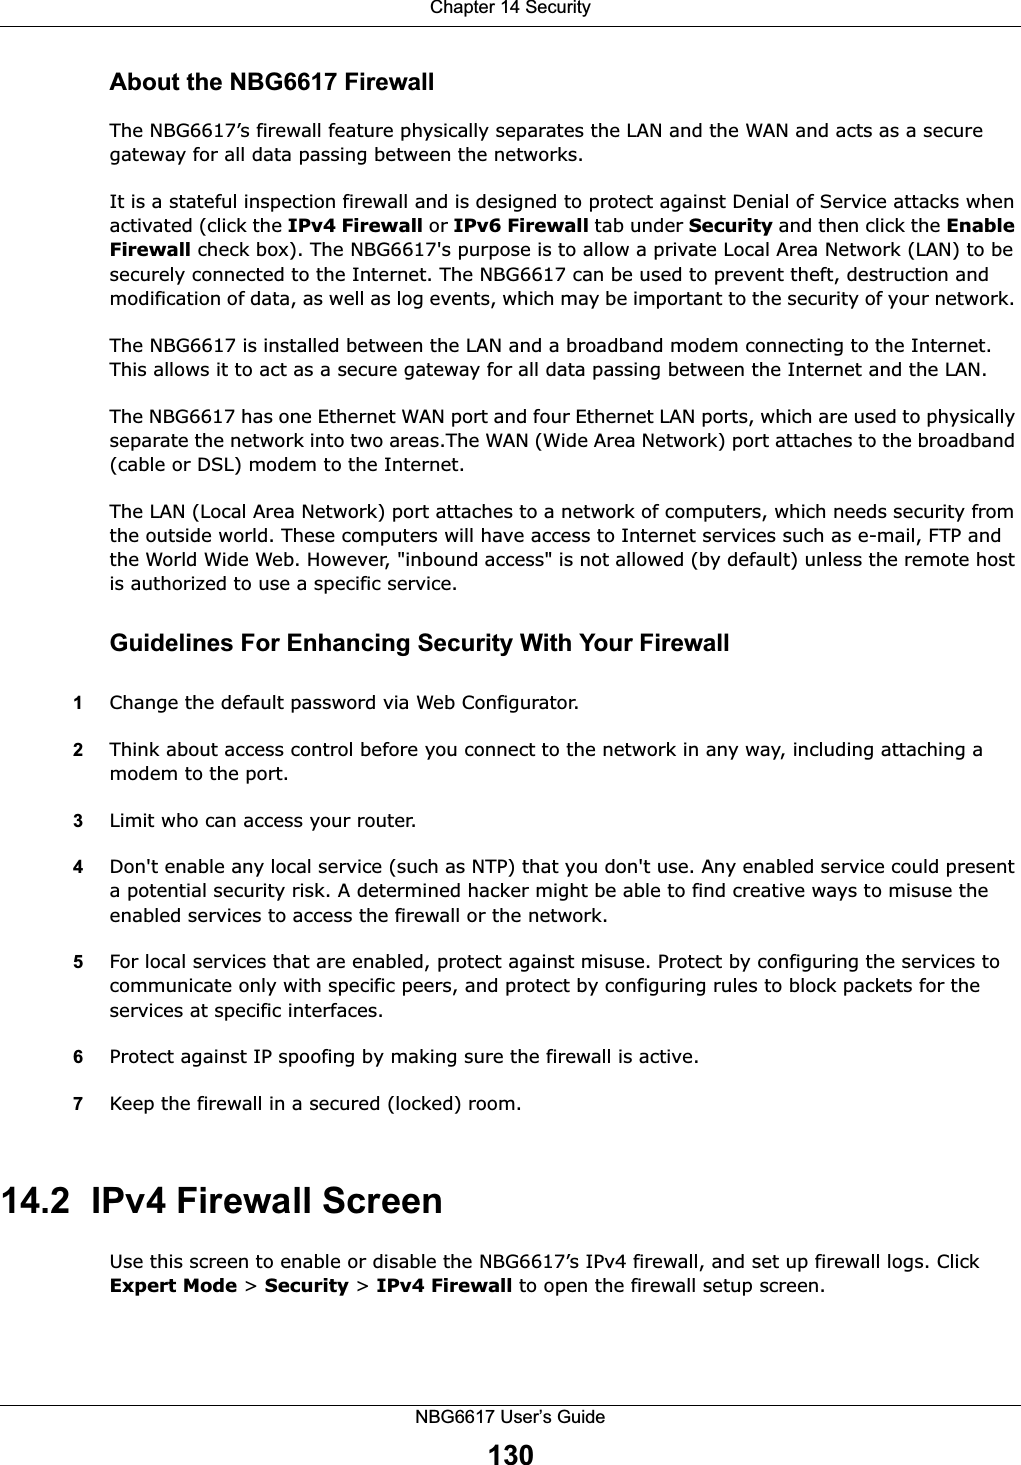 Chapter 14 SecurityNBG6617 User’s Guide130About the NBG6617 FirewallThe NBG6617’s firewall feature physically separates the LAN and the WAN and acts as a secure gateway for all data passing between the networks.It is a stateful inspection firewall and is designed to protect against Denial of Service attacks when activated (click the IPv4 Firewall or IPv6 Firewall tab under Security and then click the Enable Firewall check box). The NBG6617&apos;s purpose is to allow a private Local Area Network (LAN) to be securely connected to the Internet. The NBG6617 can be used to prevent theft, destruction and modification of data, as well as log events, which may be important to the security of your network. The NBG6617 is installed between the LAN and a broadband modem connecting to the Internet. This allows it to act as a secure gateway for all data passing between the Internet and the LAN.The NBG6617 has one Ethernet WAN port and four Ethernet LAN ports, which are used to physically separate the network into two areas.The WAN (Wide Area Network) port attaches to the broadband (cable or DSL) modem to the Internet.The LAN (Local Area Network) port attaches to a network of computers, which needs security from the outside world. These computers will have access to Internet services such as e-mail, FTP and the World Wide Web. However, &quot;inbound access&quot; is not allowed (by default) unless the remote host is authorized to use a specific service.Guidelines For Enhancing Security With Your Firewall1Change the default password via Web Configurator. 2Think about access control before you connect to the network in any way, including attaching a modem to the port. 3Limit who can access your router. 4Don&apos;t enable any local service (such as NTP) that you don&apos;t use. Any enabled service could present a potential security risk. A determined hacker might be able to find creative ways to misuse the enabled services to access the firewall or the network. 5For local services that are enabled, protect against misuse. Protect by configuring the services to communicate only with specific peers, and protect by configuring rules to block packets for the services at specific interfaces. 6Protect against IP spoofing by making sure the firewall is active. 7Keep the firewall in a secured (locked) room. 14.2  IPv4 Firewall Screen   Use this screen to enable or disable the NBG6617’s IPv4 firewall, and set up firewall logs. Click Expert Mode &gt; Security &gt; IPv4 Firewall to open the firewall setup screen.